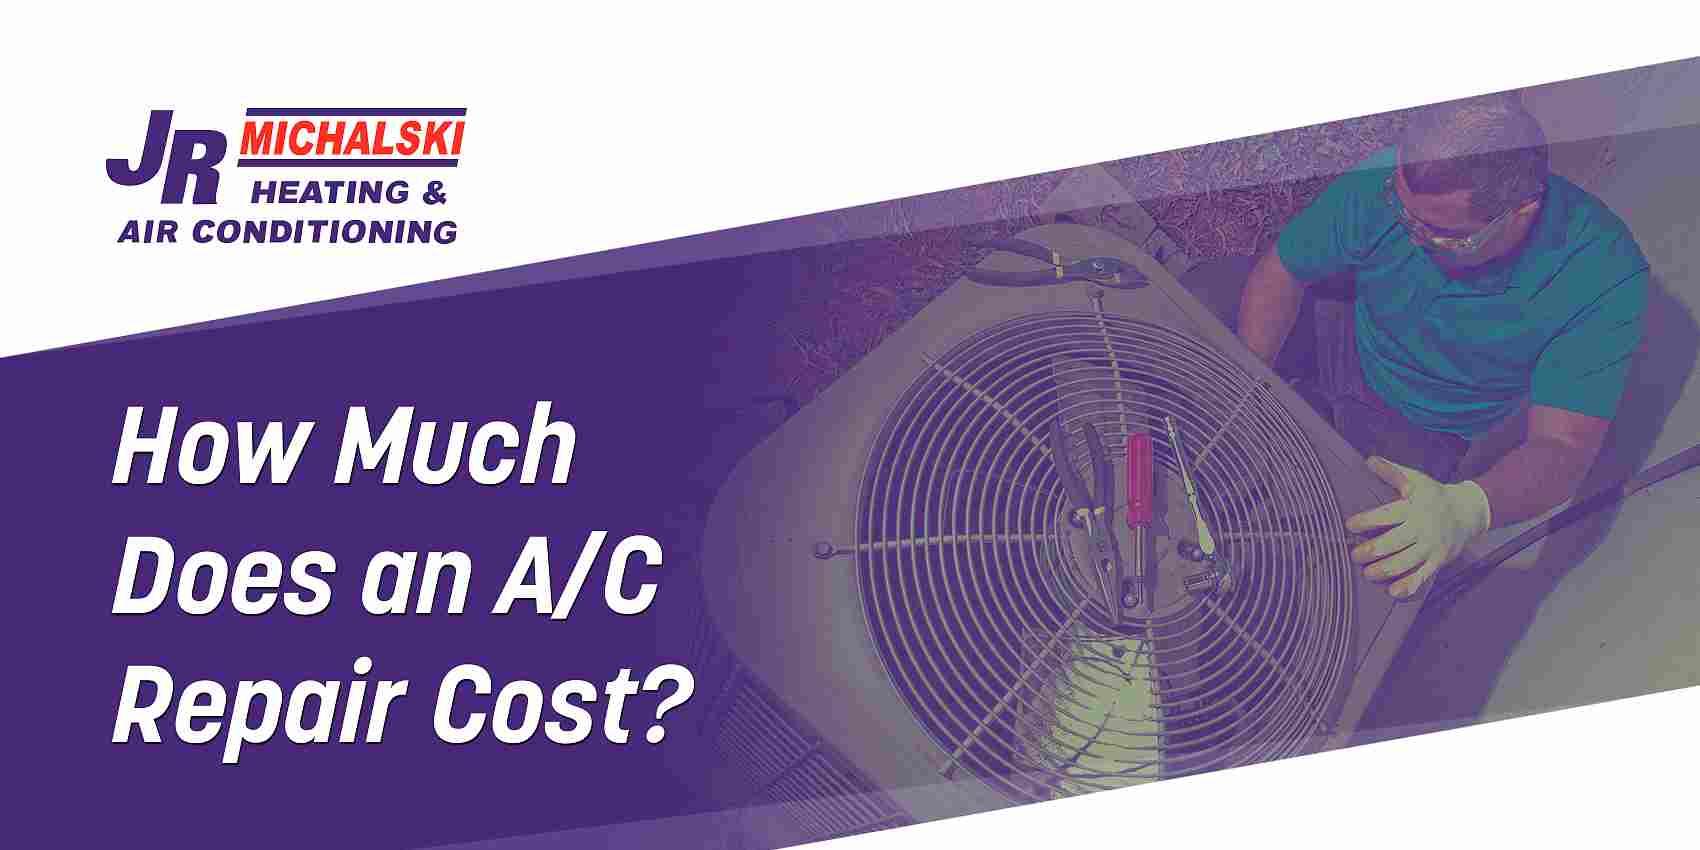 How Much Does an A/C Repair Cost?